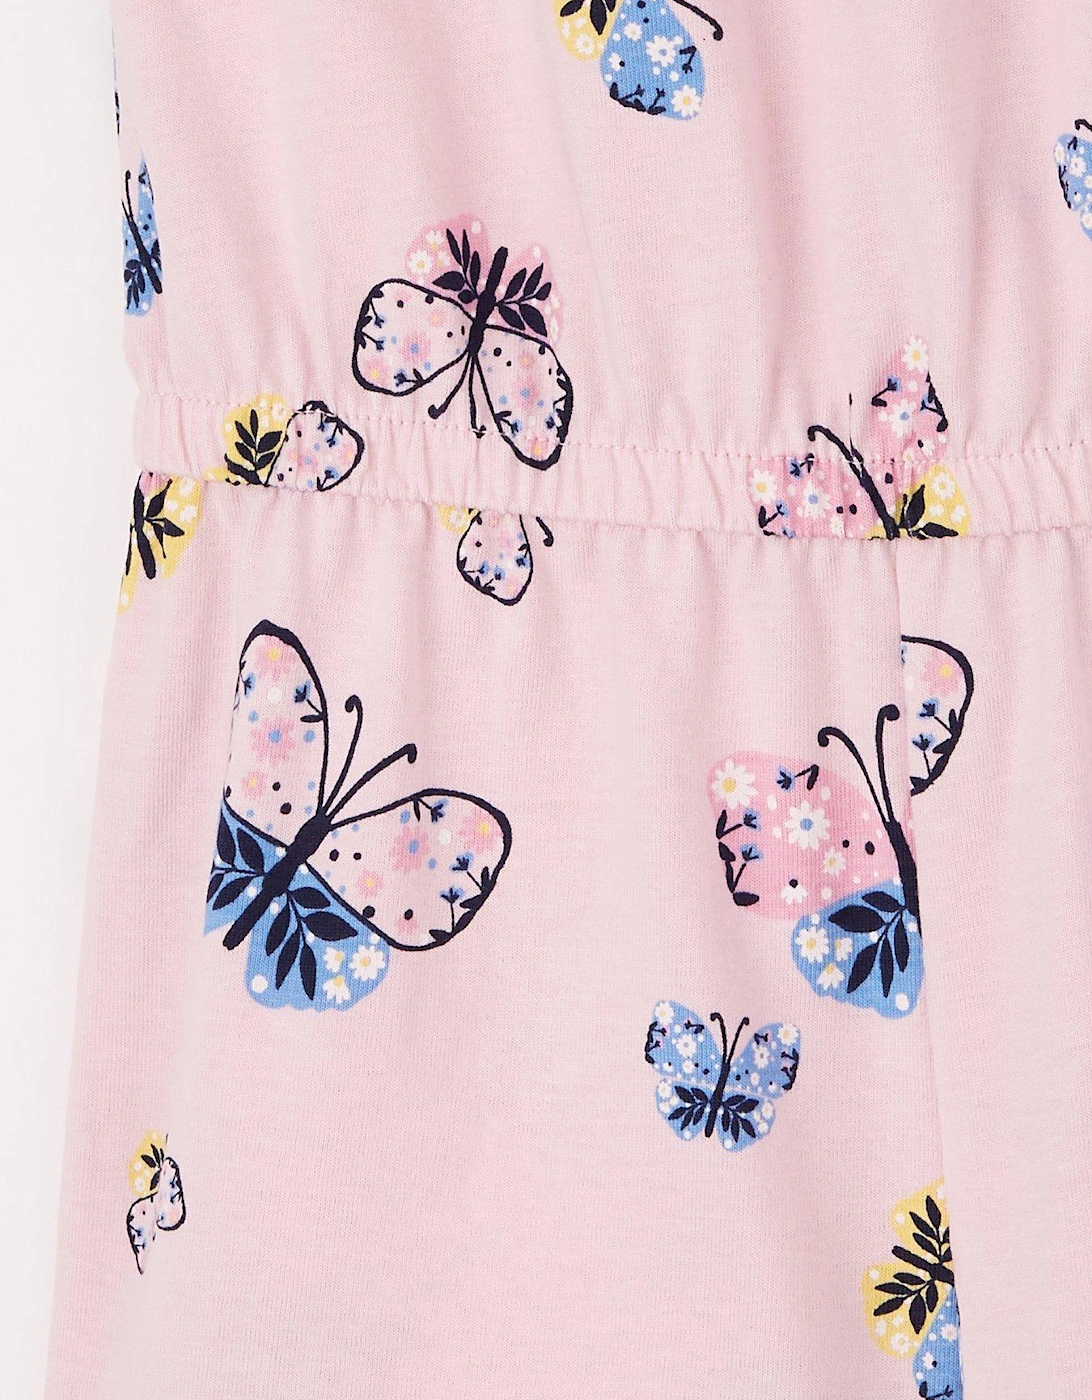 Girls Butterfly Print Playsuit - Pink